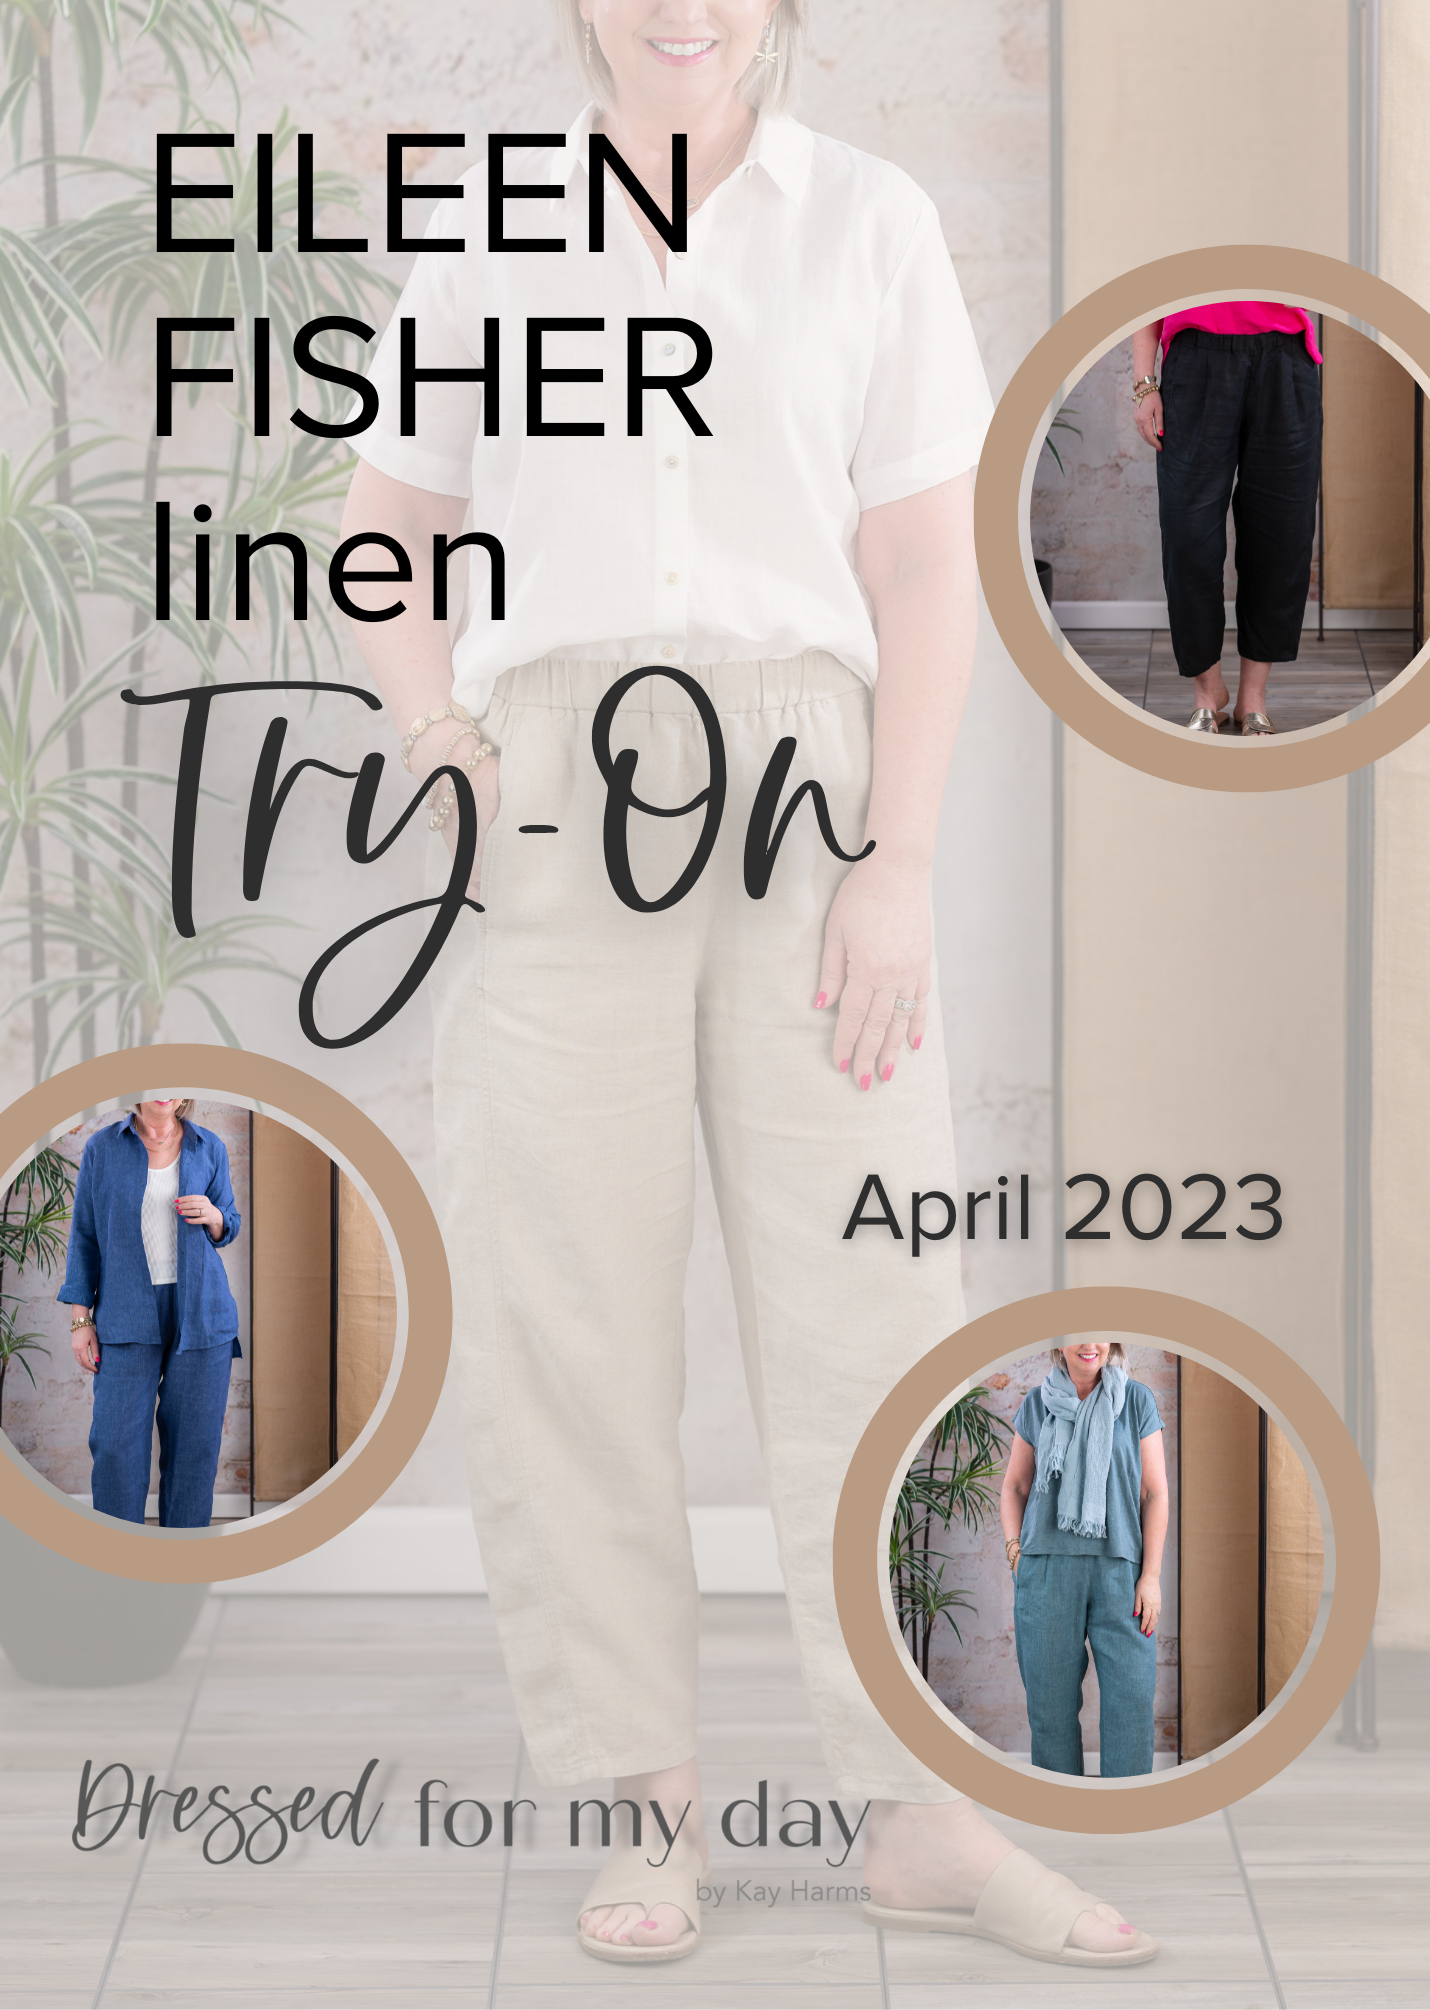 Eileen Fisher Linen try-on Session 2023